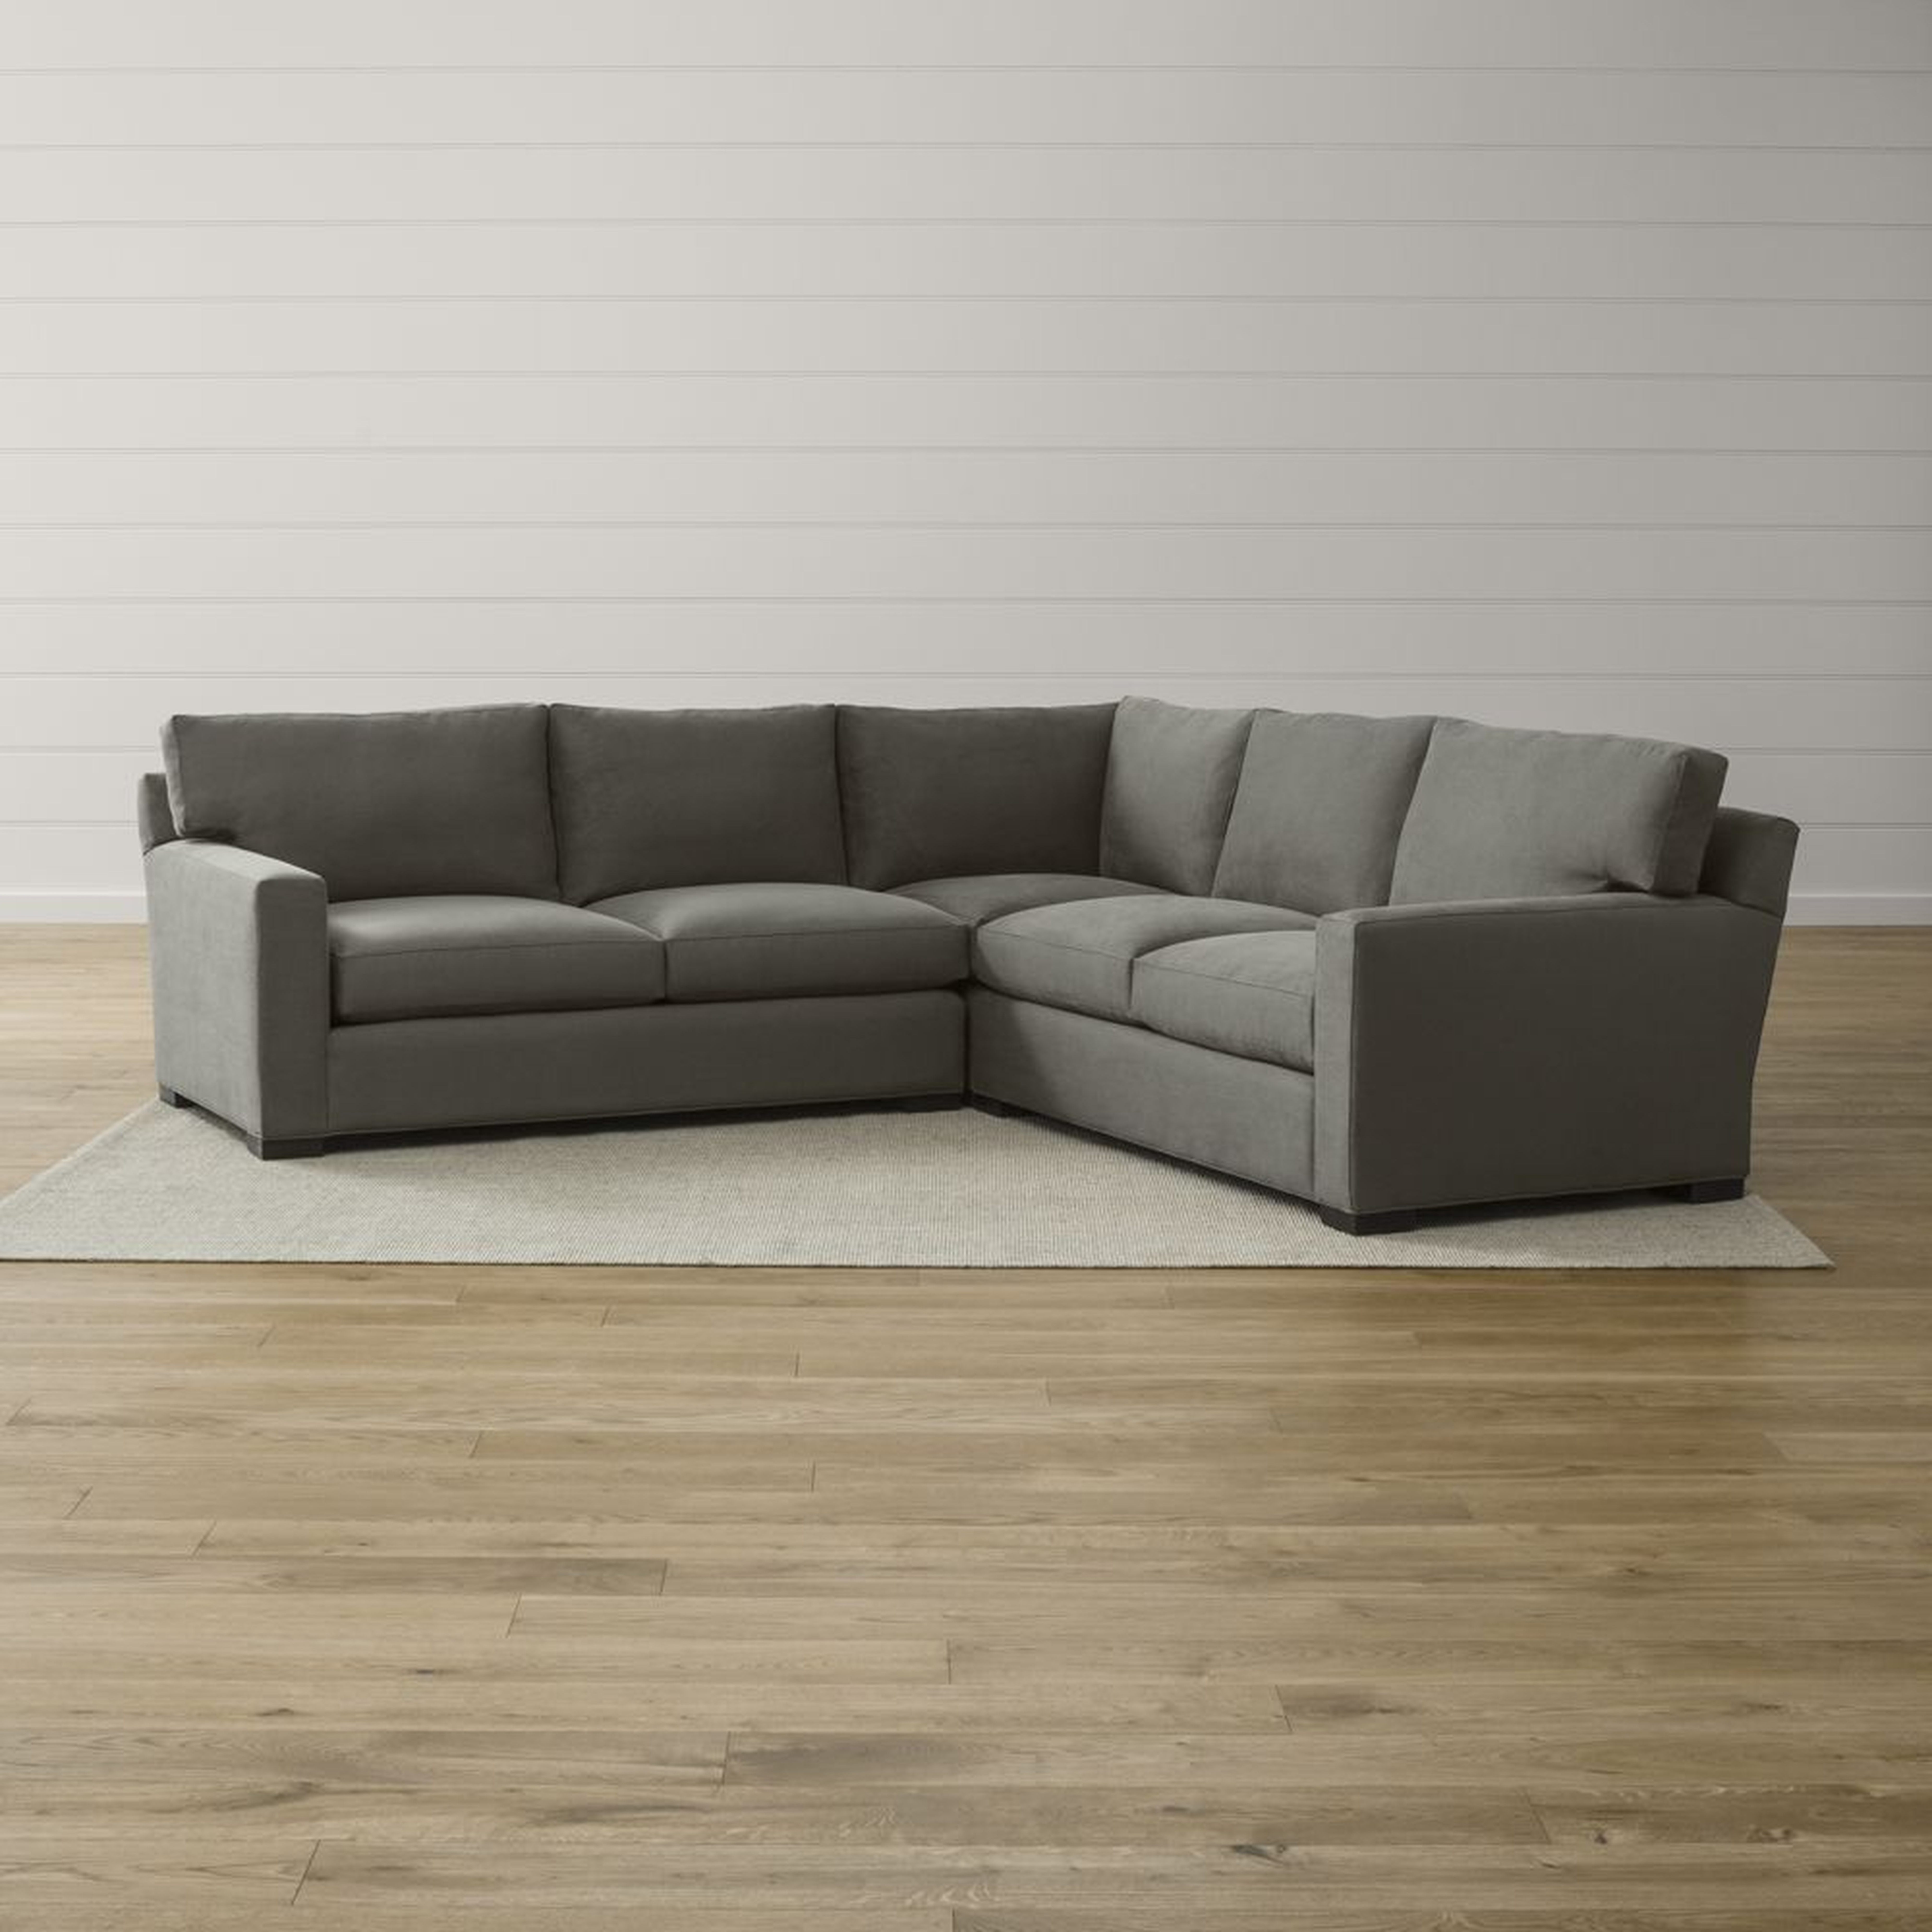 Axis II 3-Piece Sectional Sofa - Crate and Barrel